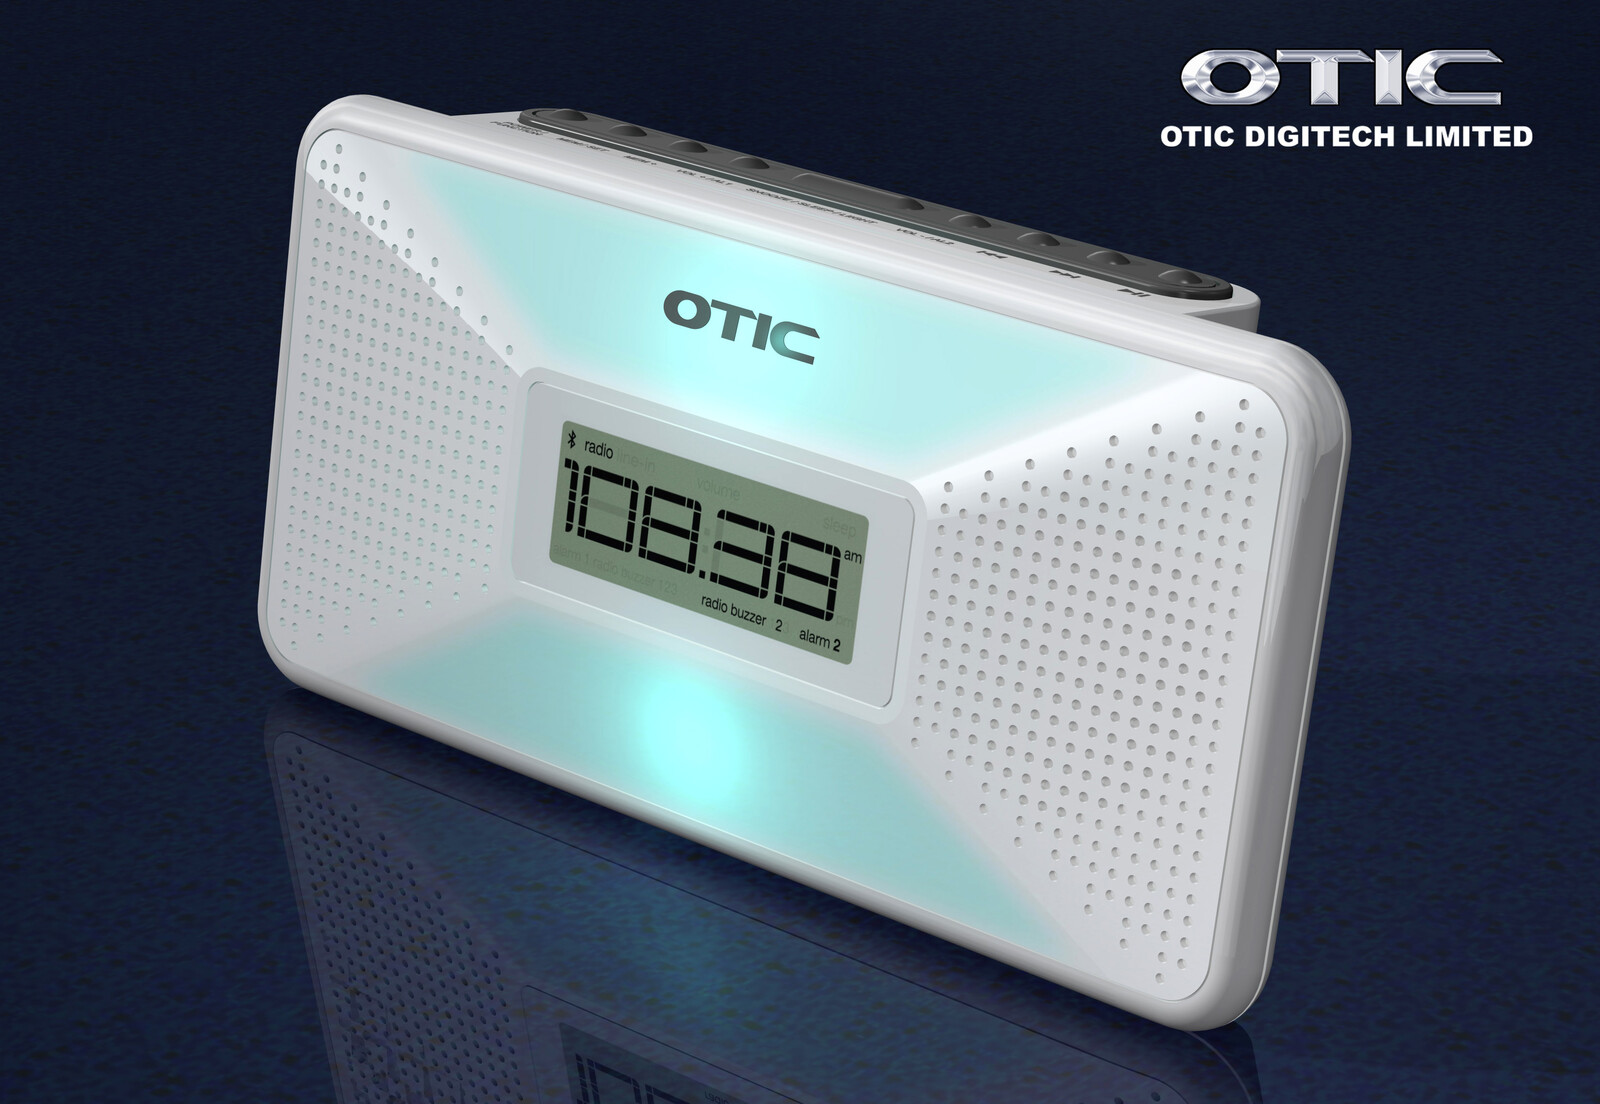 💎 Bluetooth Speaker with Clock Radio | Design by Leung Chung Kwan on 2015 💎
Brand Name︰OTIC | Client︰OTIC Limited
Product Design Specification︰http://bit.ly/ot1416-d3-v1